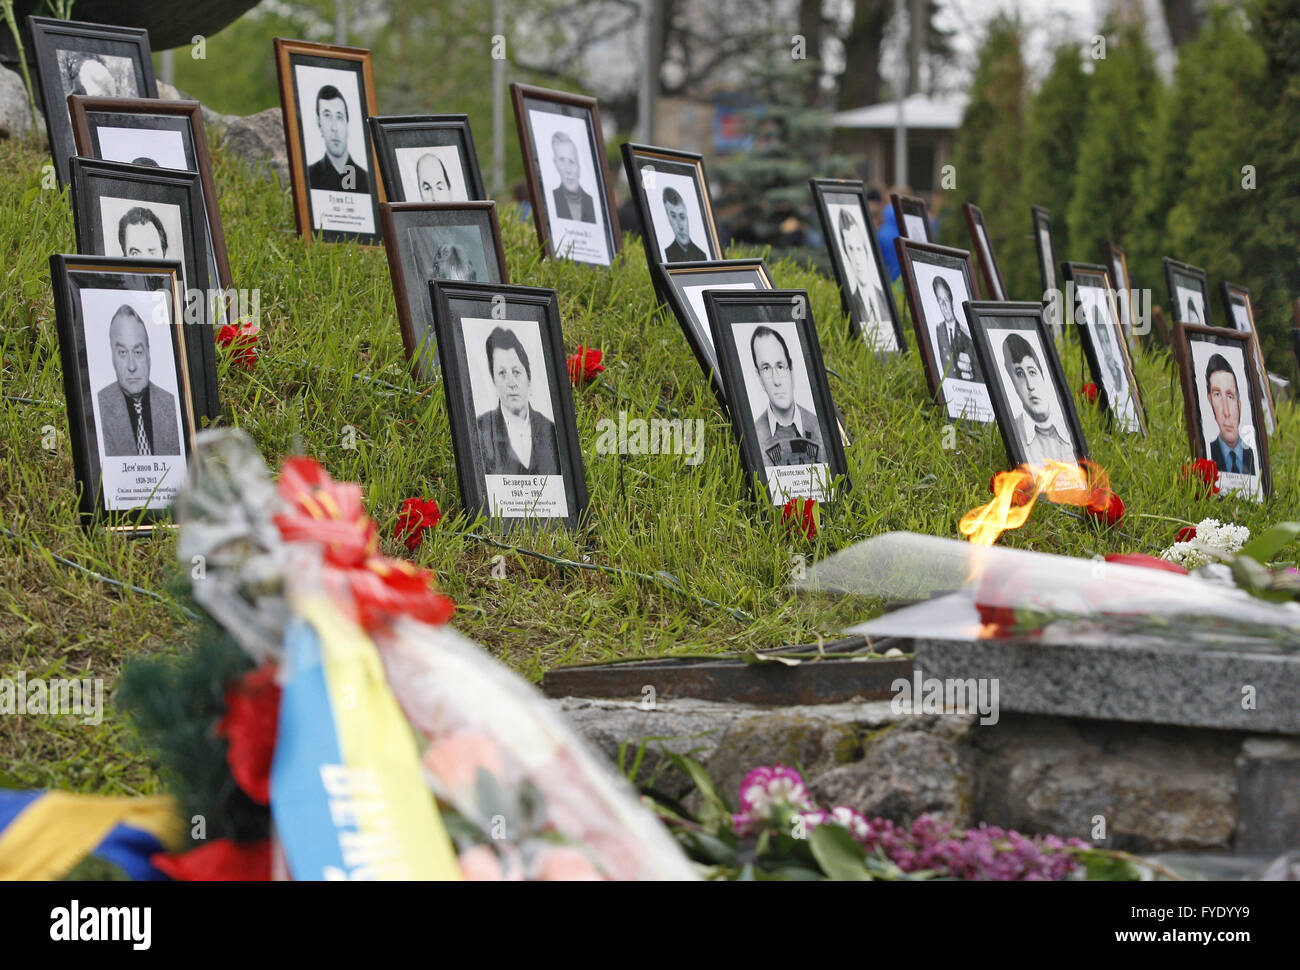 Kiev, Ukraine. 26th Apr, 2016. Portraits of lost liquidators, victims of the Chernobyl nuclear disaster, at the Chernobyl victims memorial complex. Ukrainian mark the 30th anniversary of Chernobyl's tragedy, the biggest accident in the history of nuclear power generation, that killed thousands. Credit:  Vasyl Shevchenko/Pacific Press/Alamy Live News Stock Photo